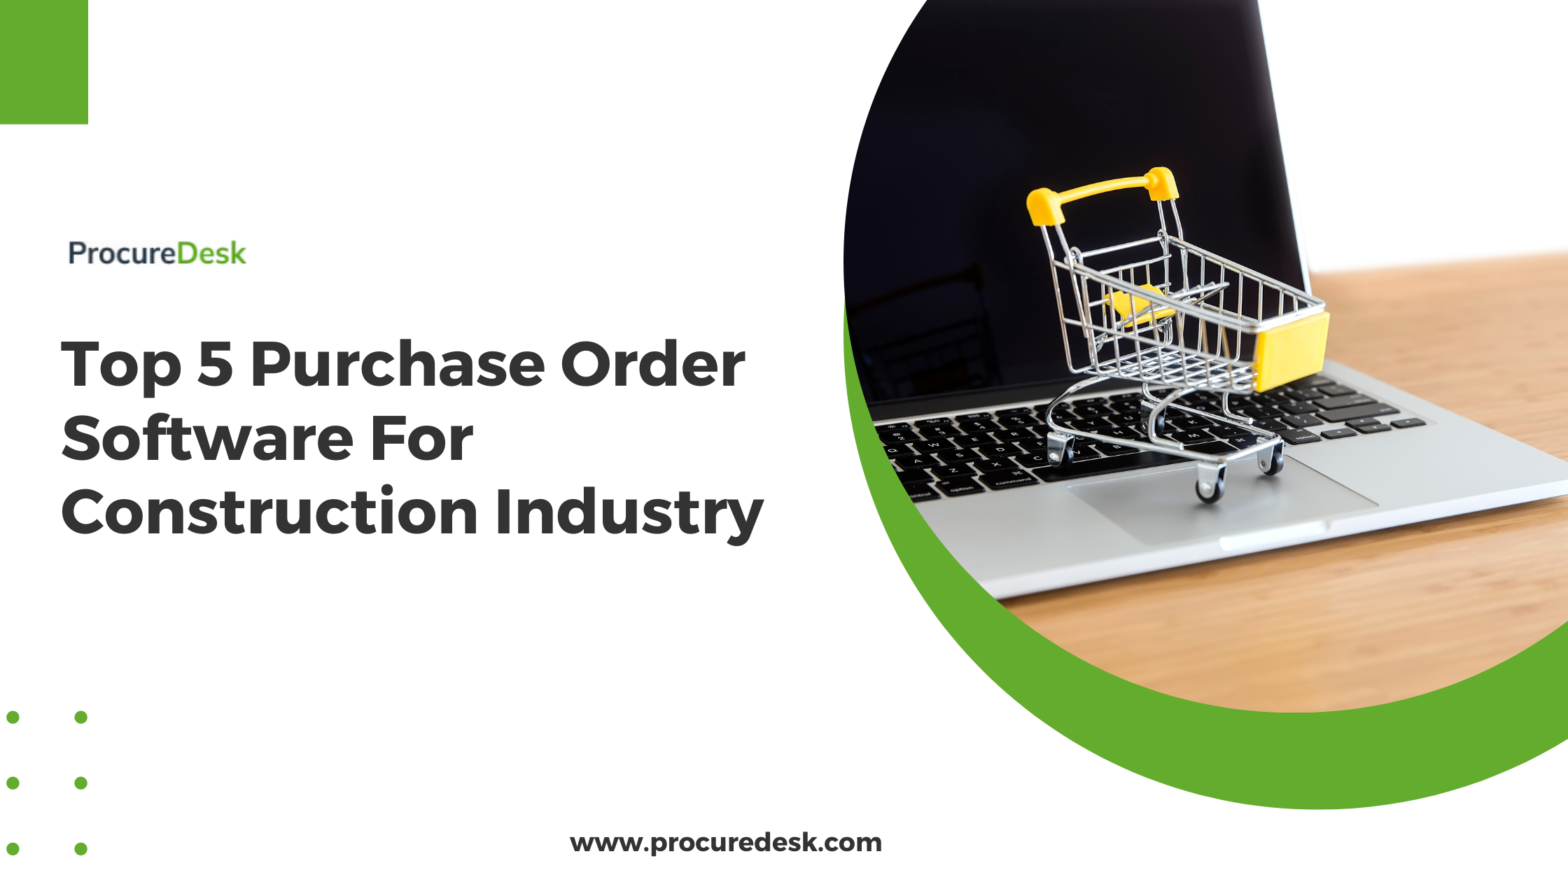 Top 5 Purchase Order Software For Construction Industry